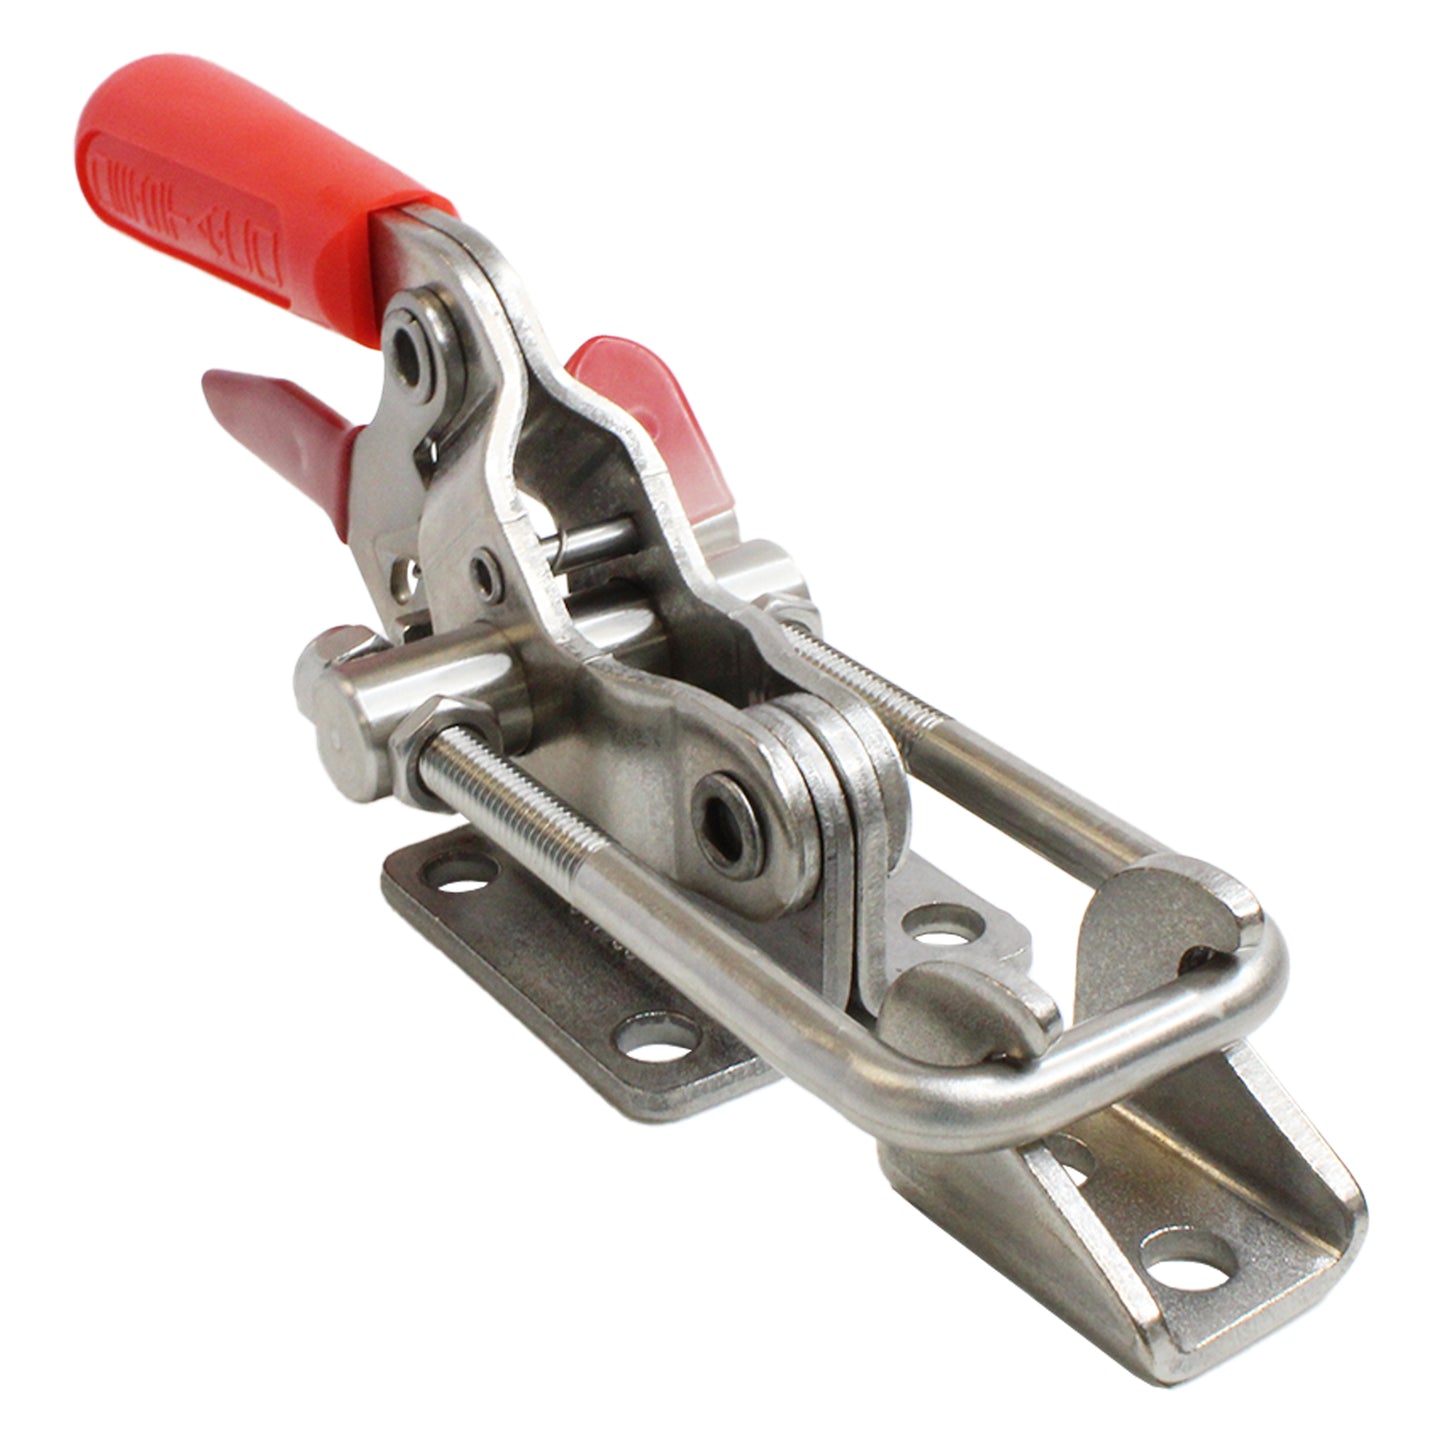 Destaco 341-RSS Pull-Action Latch Clamp